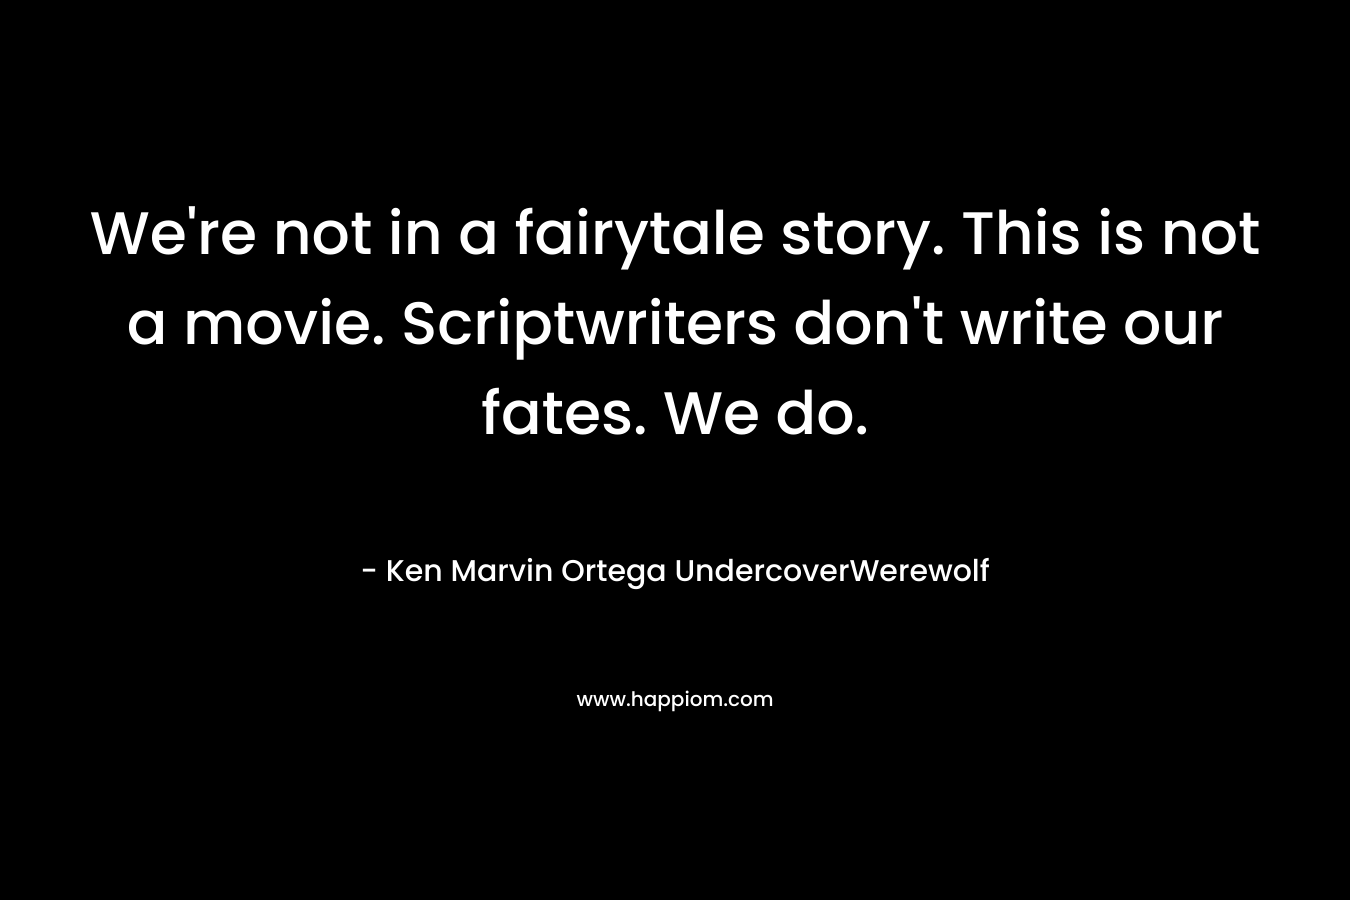 We’re not in a fairytale story. This is not a movie. Scriptwriters don’t write our fates. We do. – Ken Marvin Ortega UndercoverWerewolf